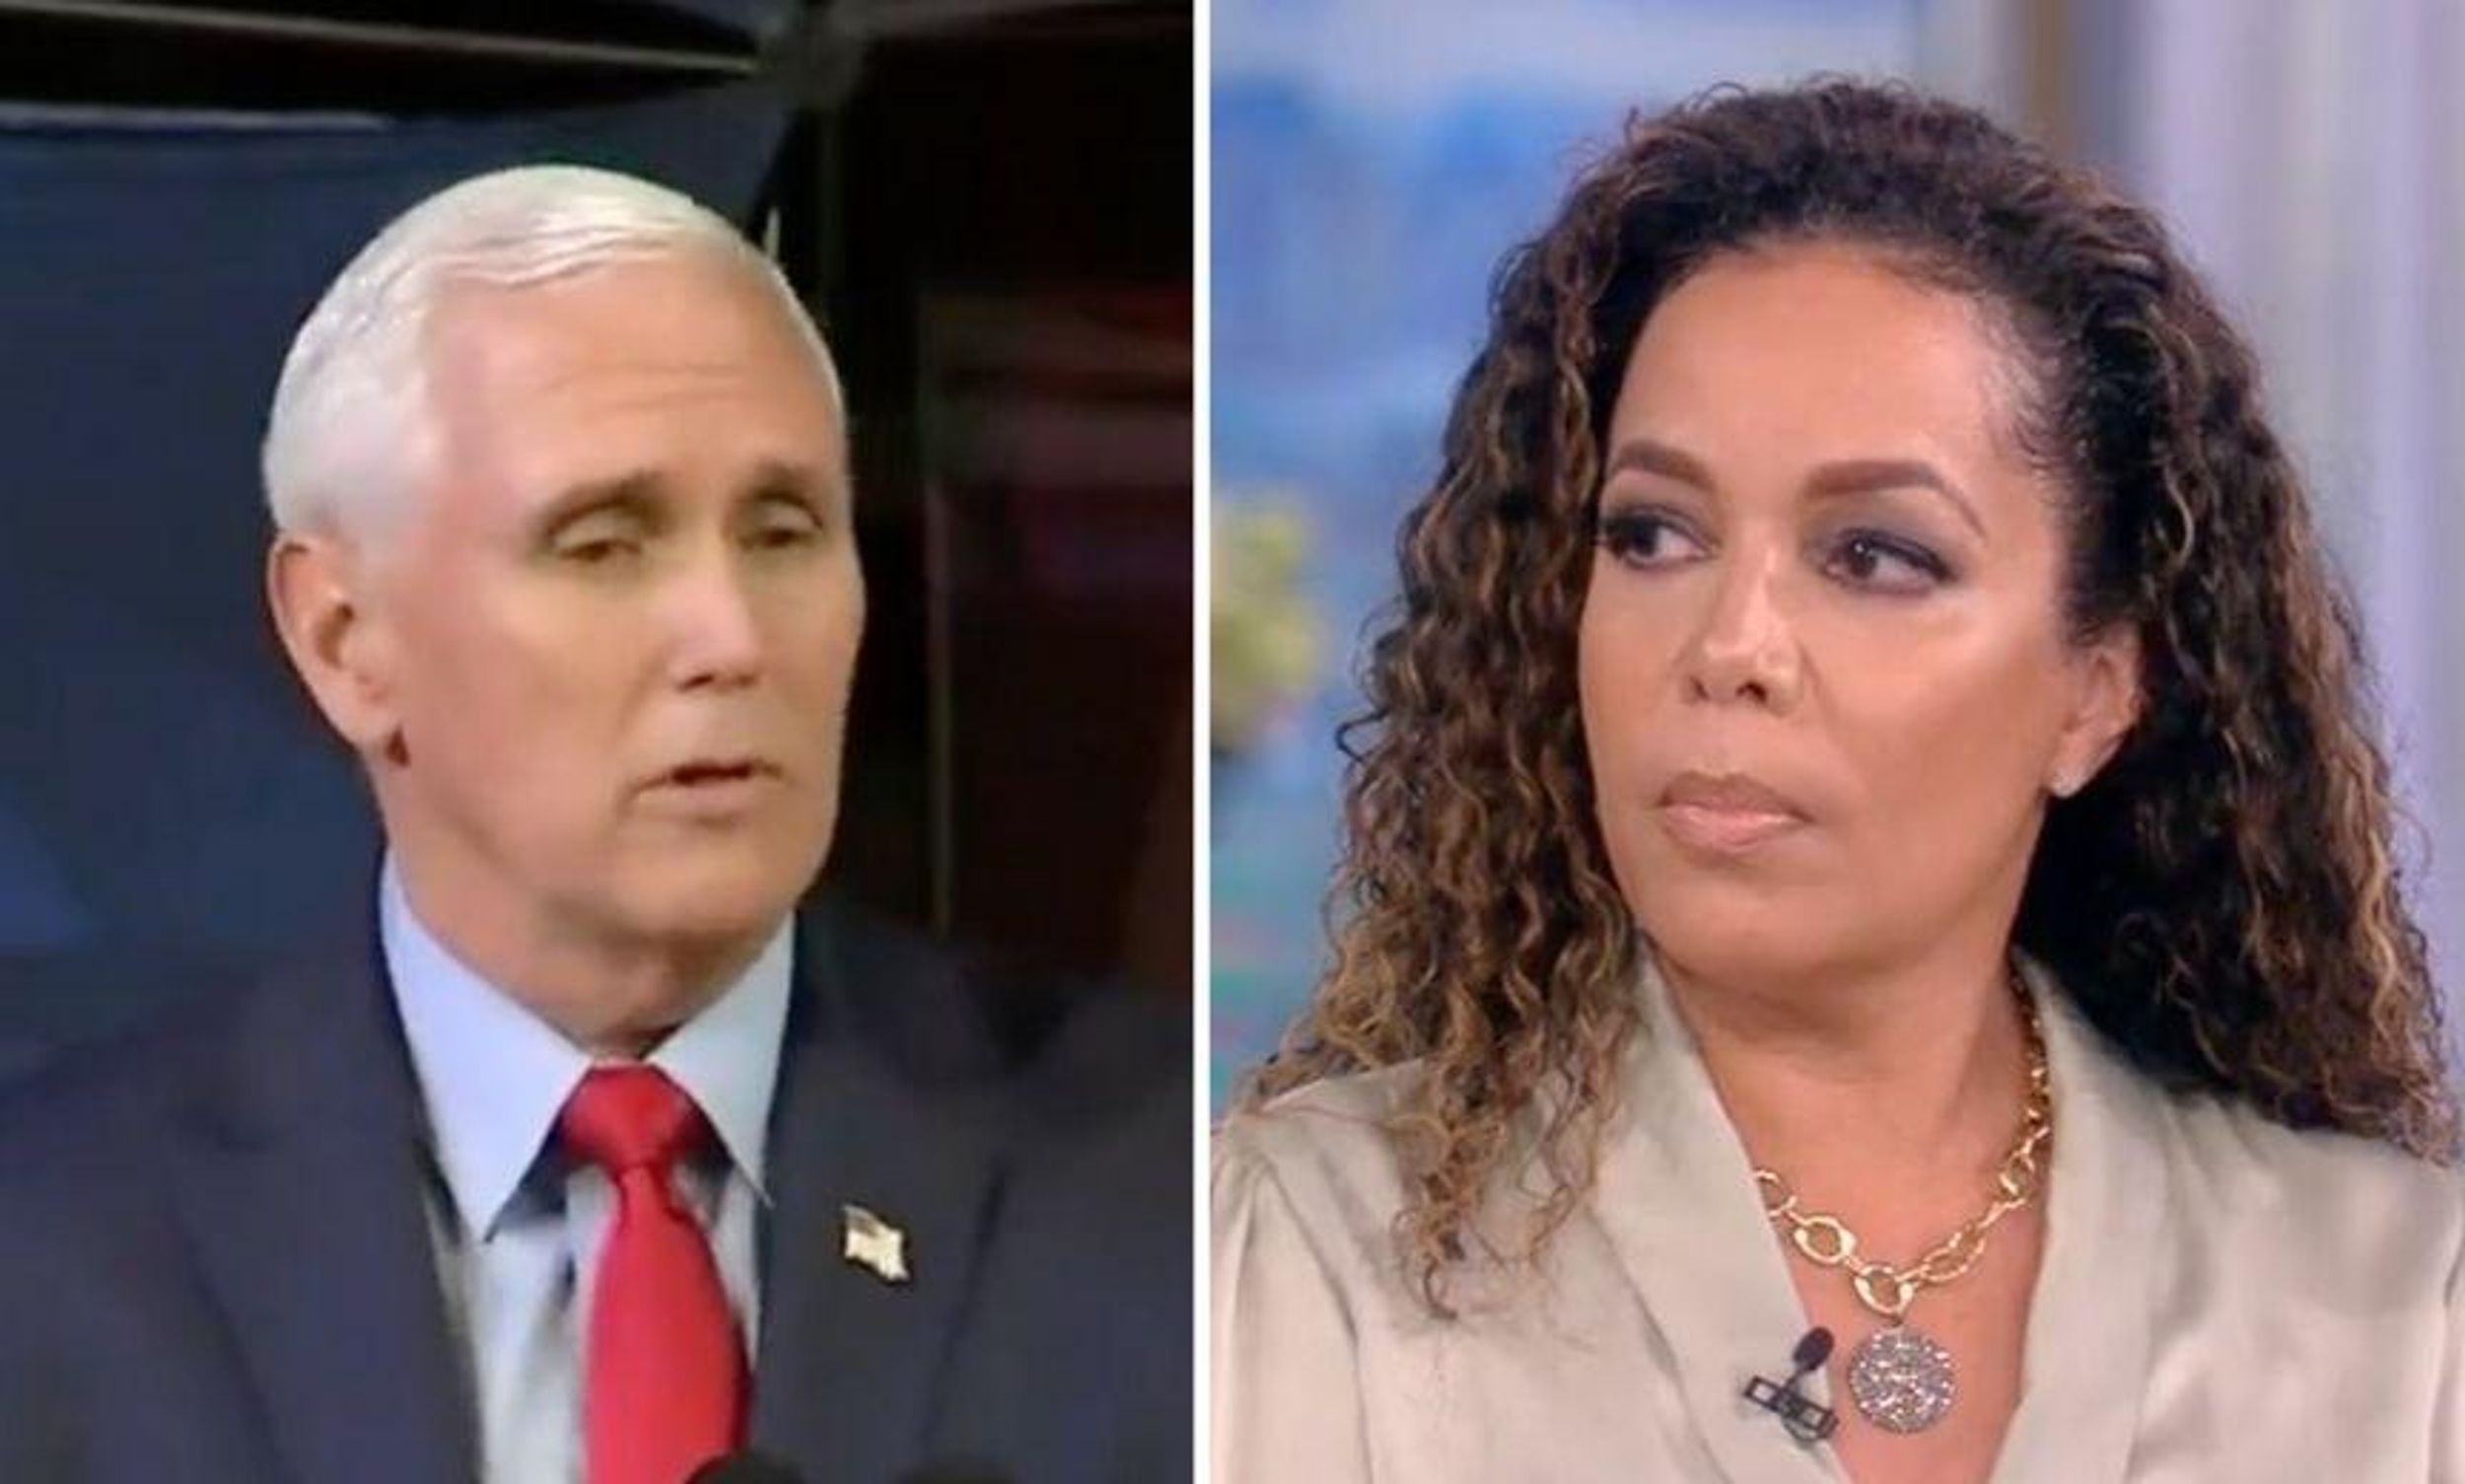 'The View' Host Calls BS on Pence's Claim That He Would Accept His Child As Gay